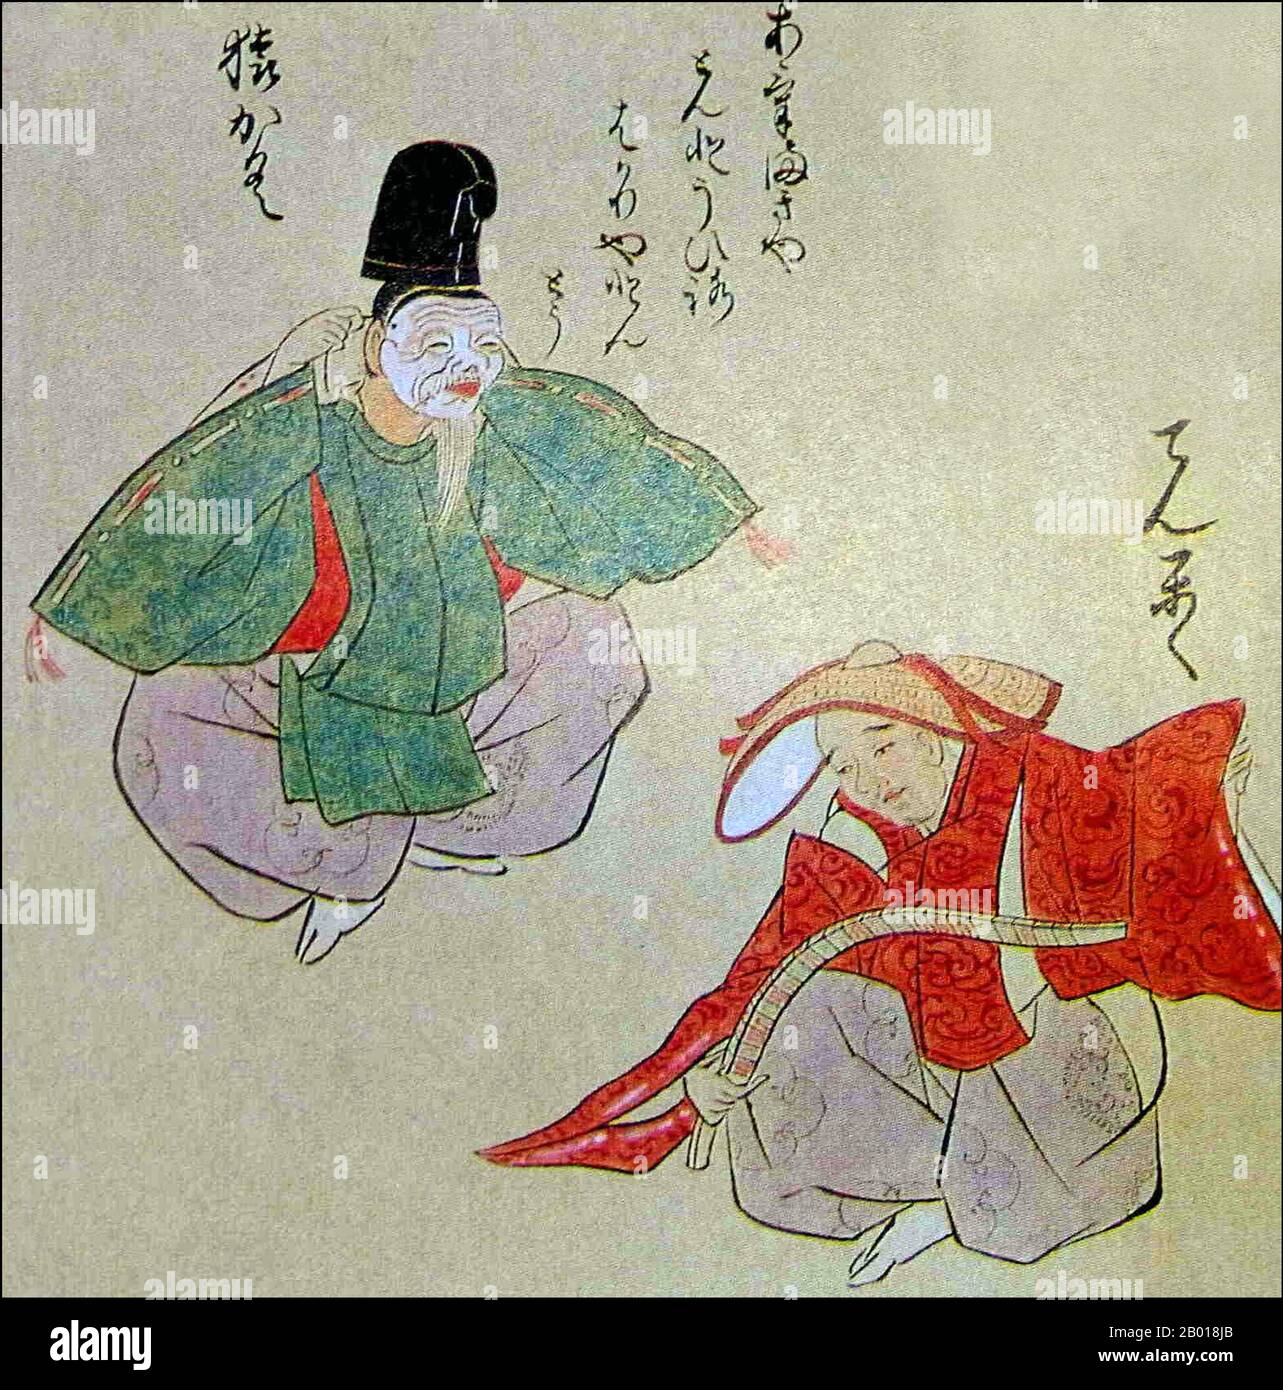 Japan: Sarugaku (left) and Dengaku (right) performers. Watercolour painting, c. 18th century.  Sarugaku, literally 'monkey music', was a form of theatre popular in Japan during the 11th to 14th centuries. It originated from 'sangaku', a form of entertainment reminiscent of the modern-day circus, consisting mostly of acrobatics, juggling, and pantomime, sometimes combined with drum dancing. It came from China to Japan in the 8th century and there mingled with indigenous traditions, particularly the harvest celebrations of Dengaku. Stock Photo